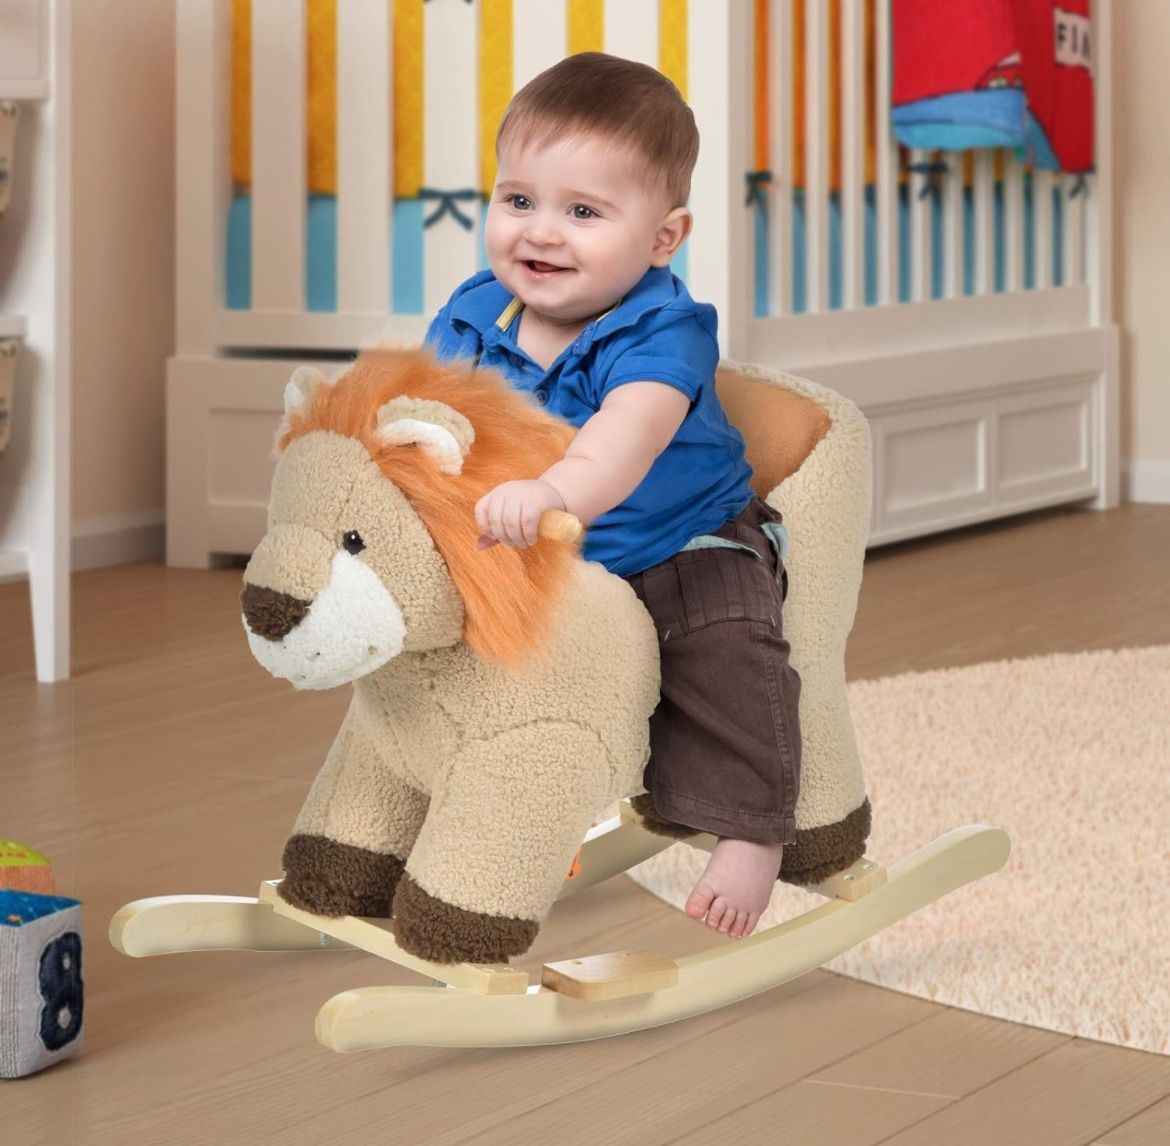 Baby Rocking Horse Lion with Sound, Plush Stuffed Rocking Animals, Wooden Rocking Horse with Seat Belt for 18-36 Months Boys and Girls Gift, Brown